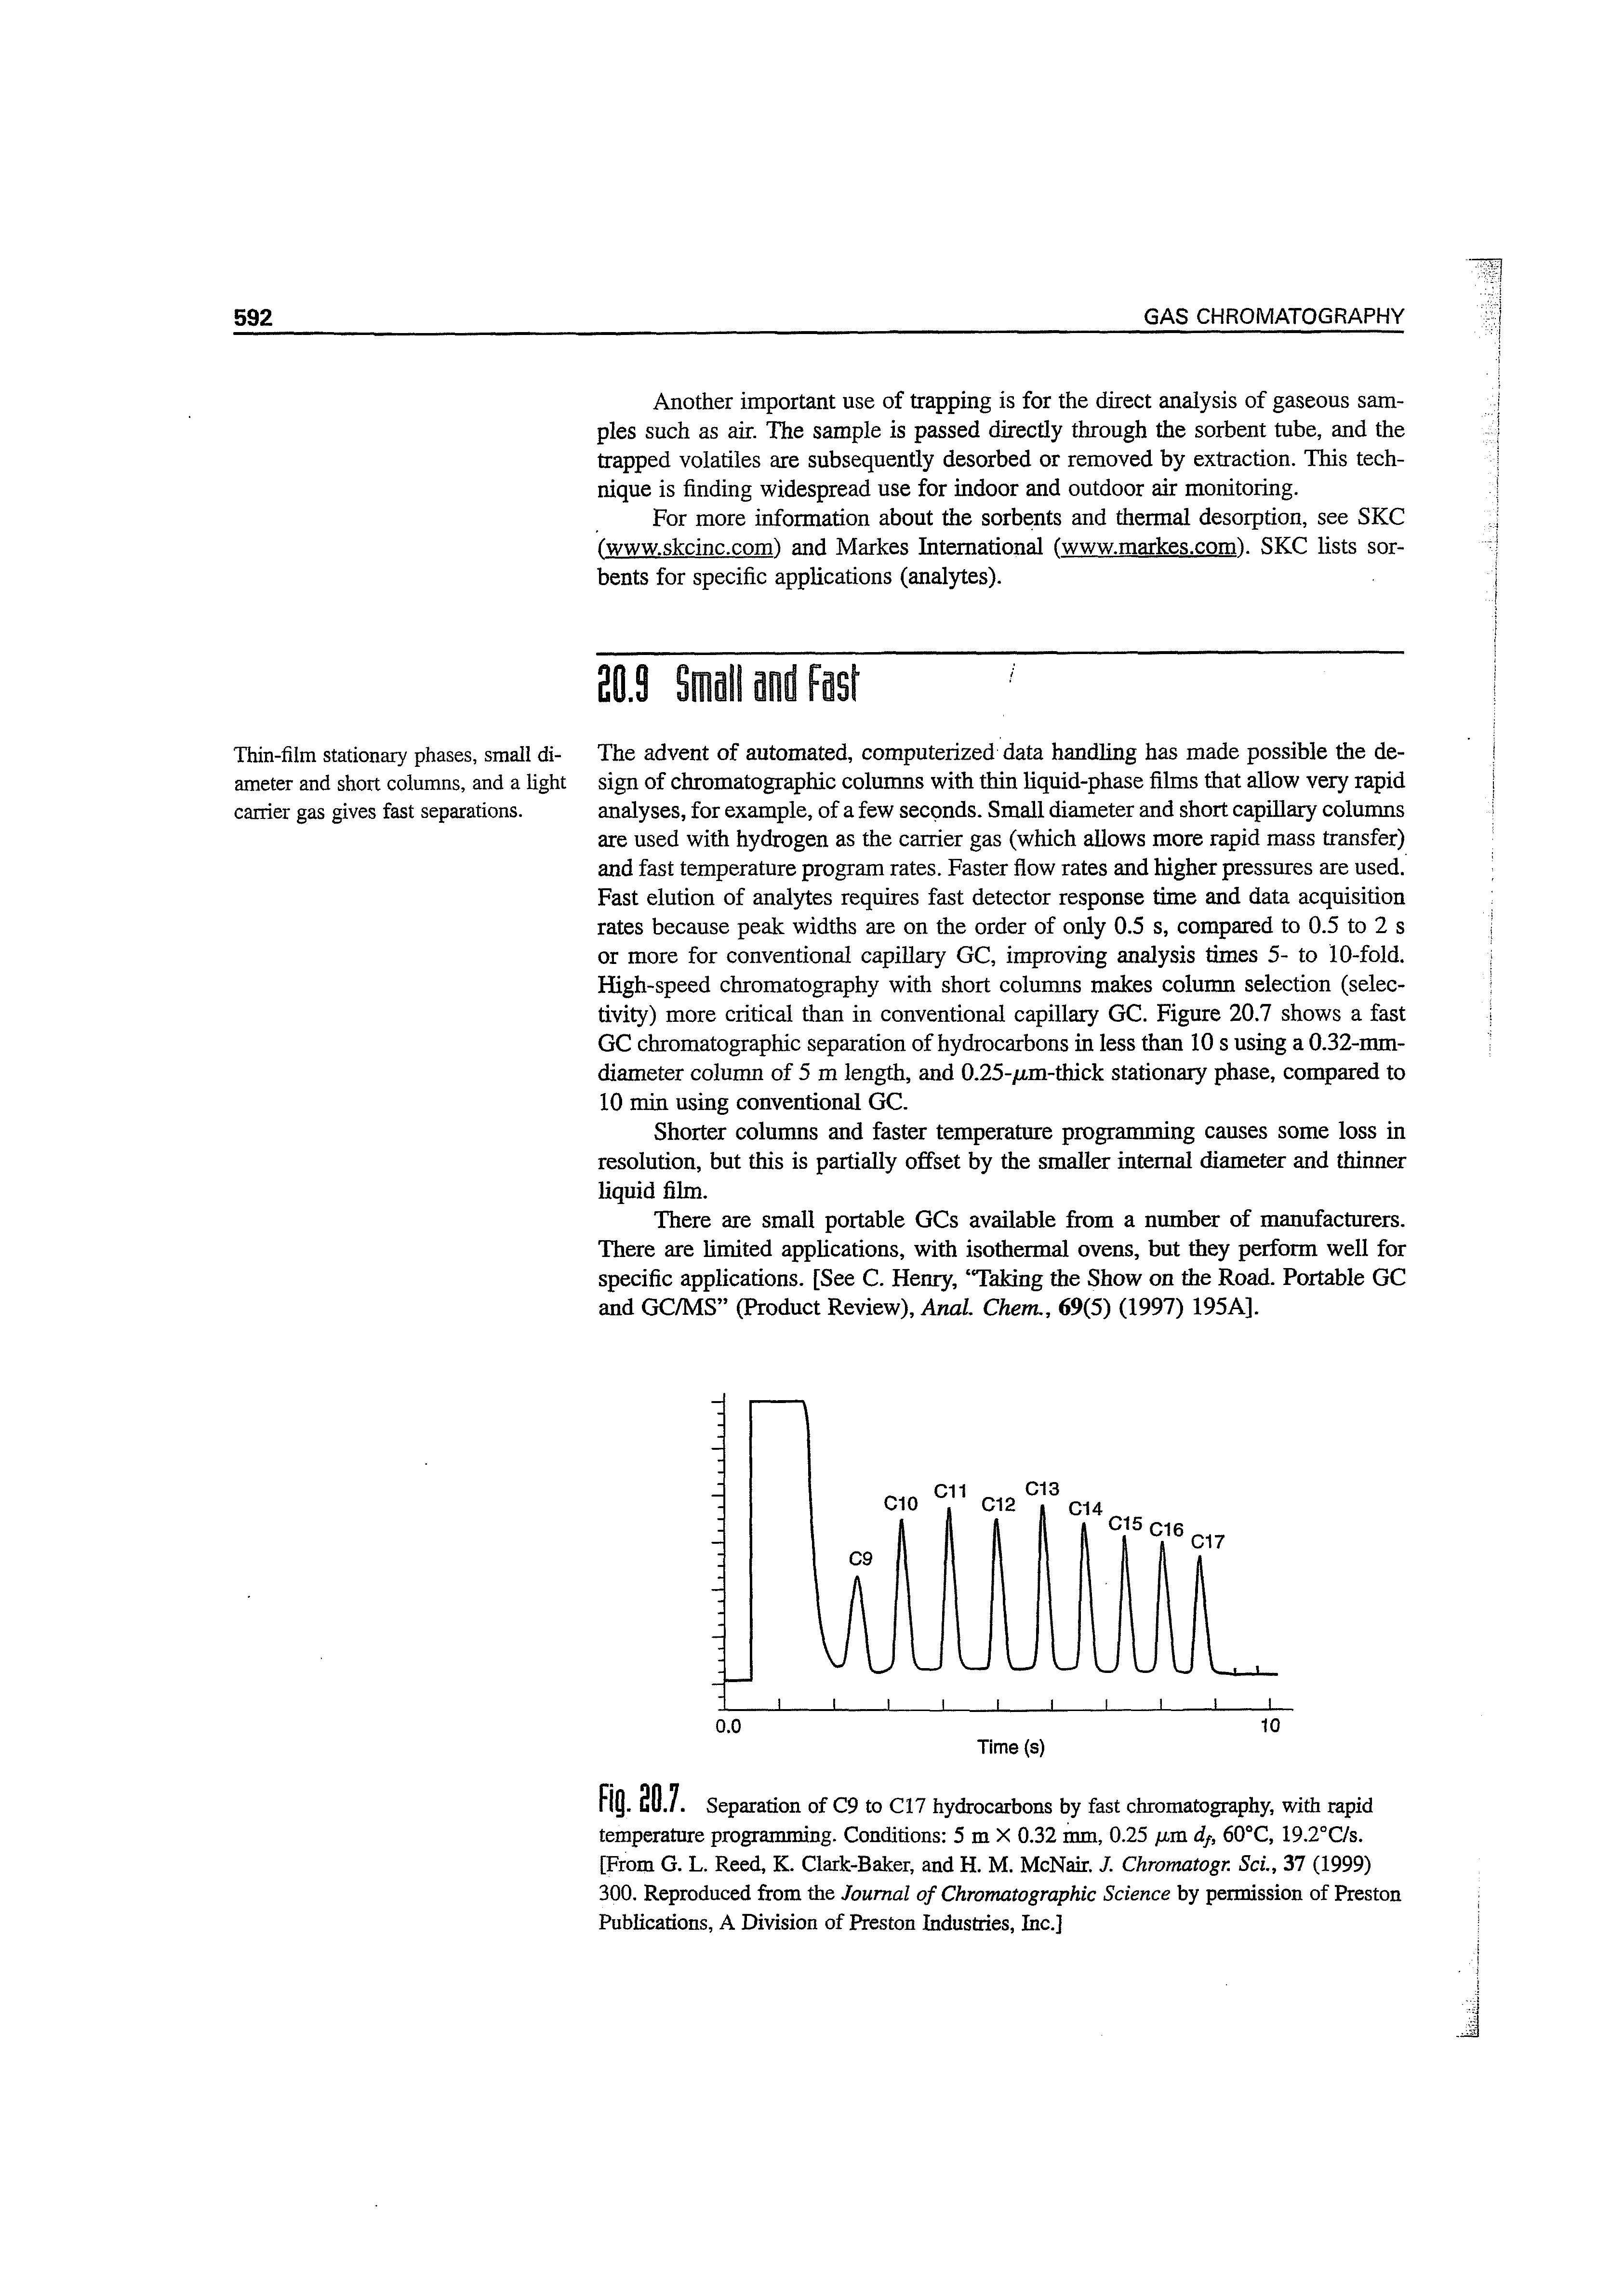 Fig. 20.7. Separation of C9 to C17 hydrocarbons by fast chromatography, with rapid temperature programming. Conditions 5 m X 0.32 mm, 0.25 tm d/, 60°C, 19.2°C/s. [From G. L. Reed, K. Clark-Baker, and H. M. McNair. J. Chromatogr. ScL, 37 (1999) 300. Reproduced from the Journal of Chromatographic Science by permission of Preston Publications, A Division of Preston Industries, Inc.]...